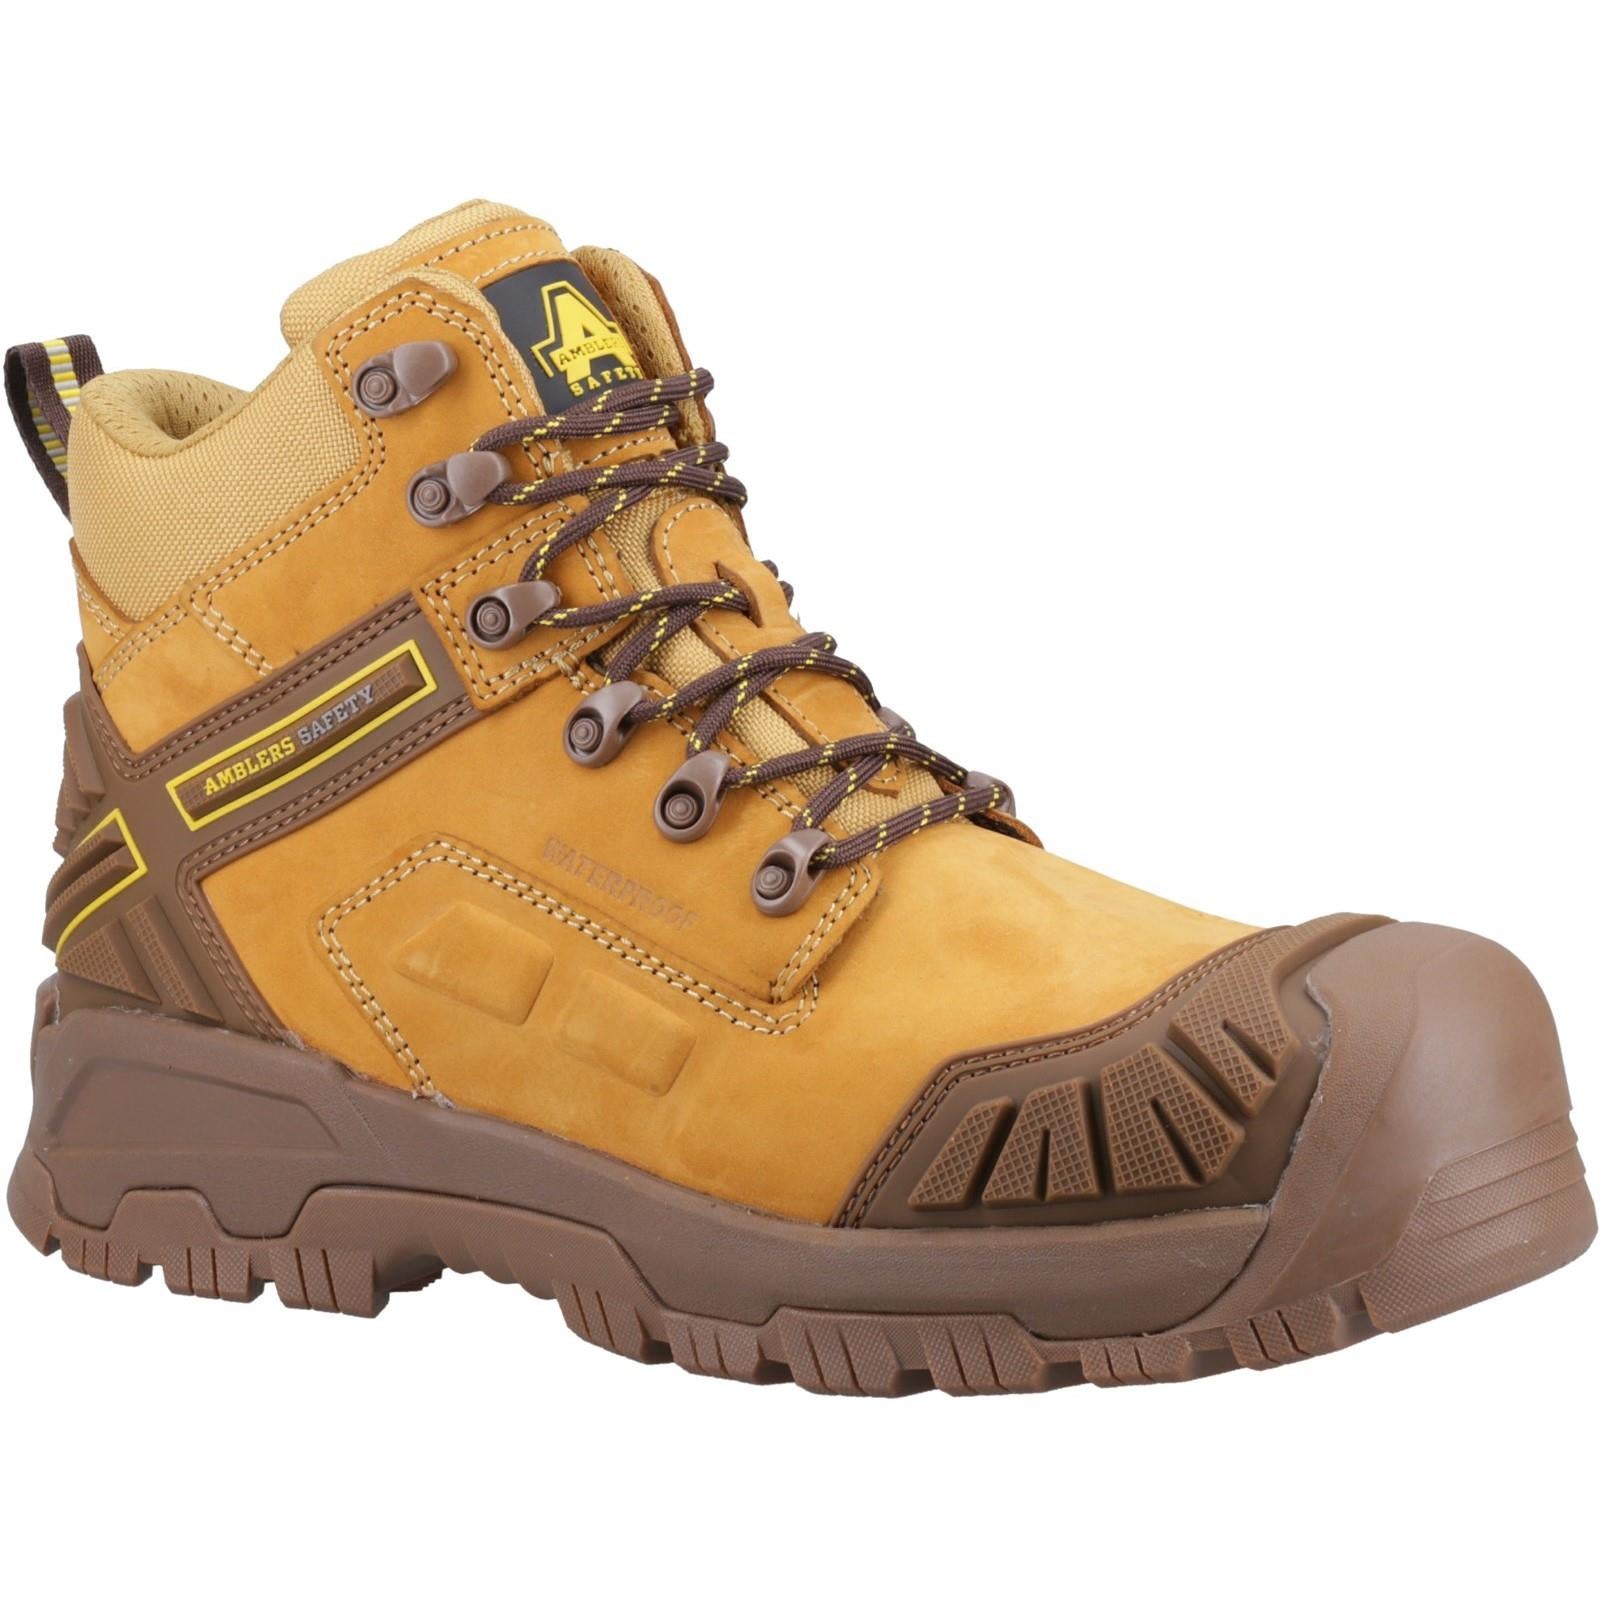 Amblers AS960C Ignite S7 honey leather composite waterproof work safety boots